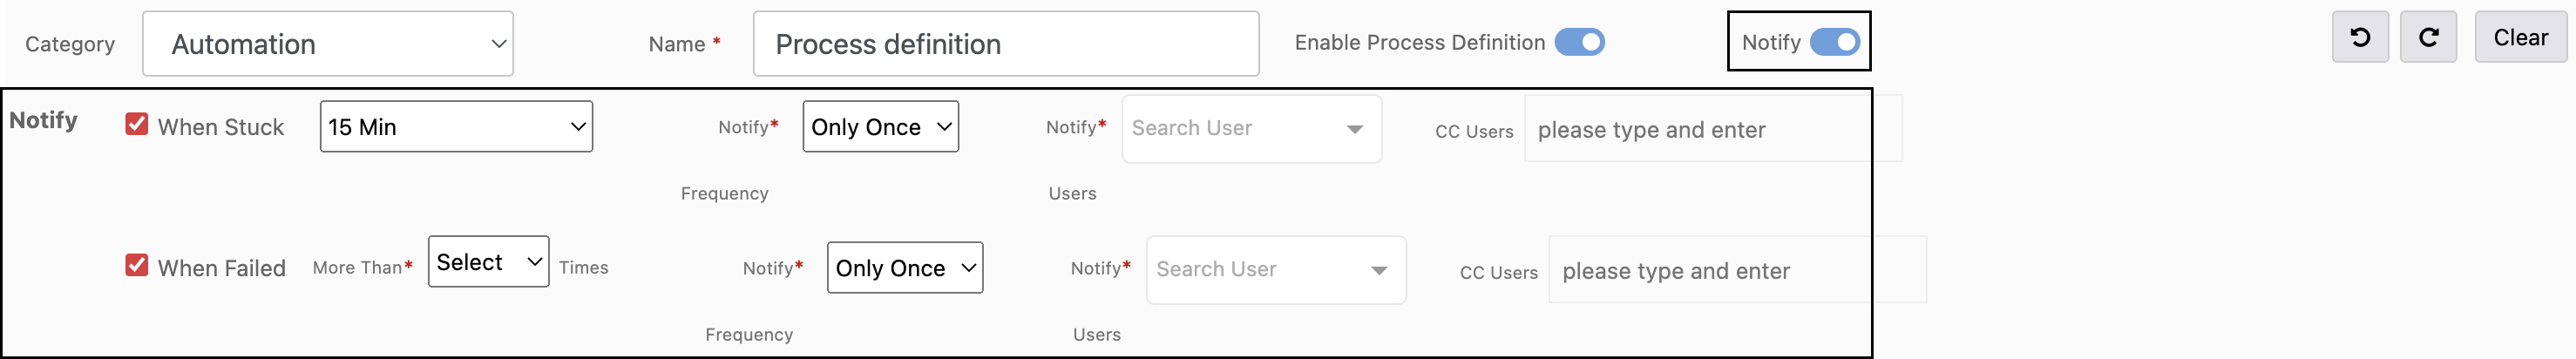 Notify Option for Process Definition